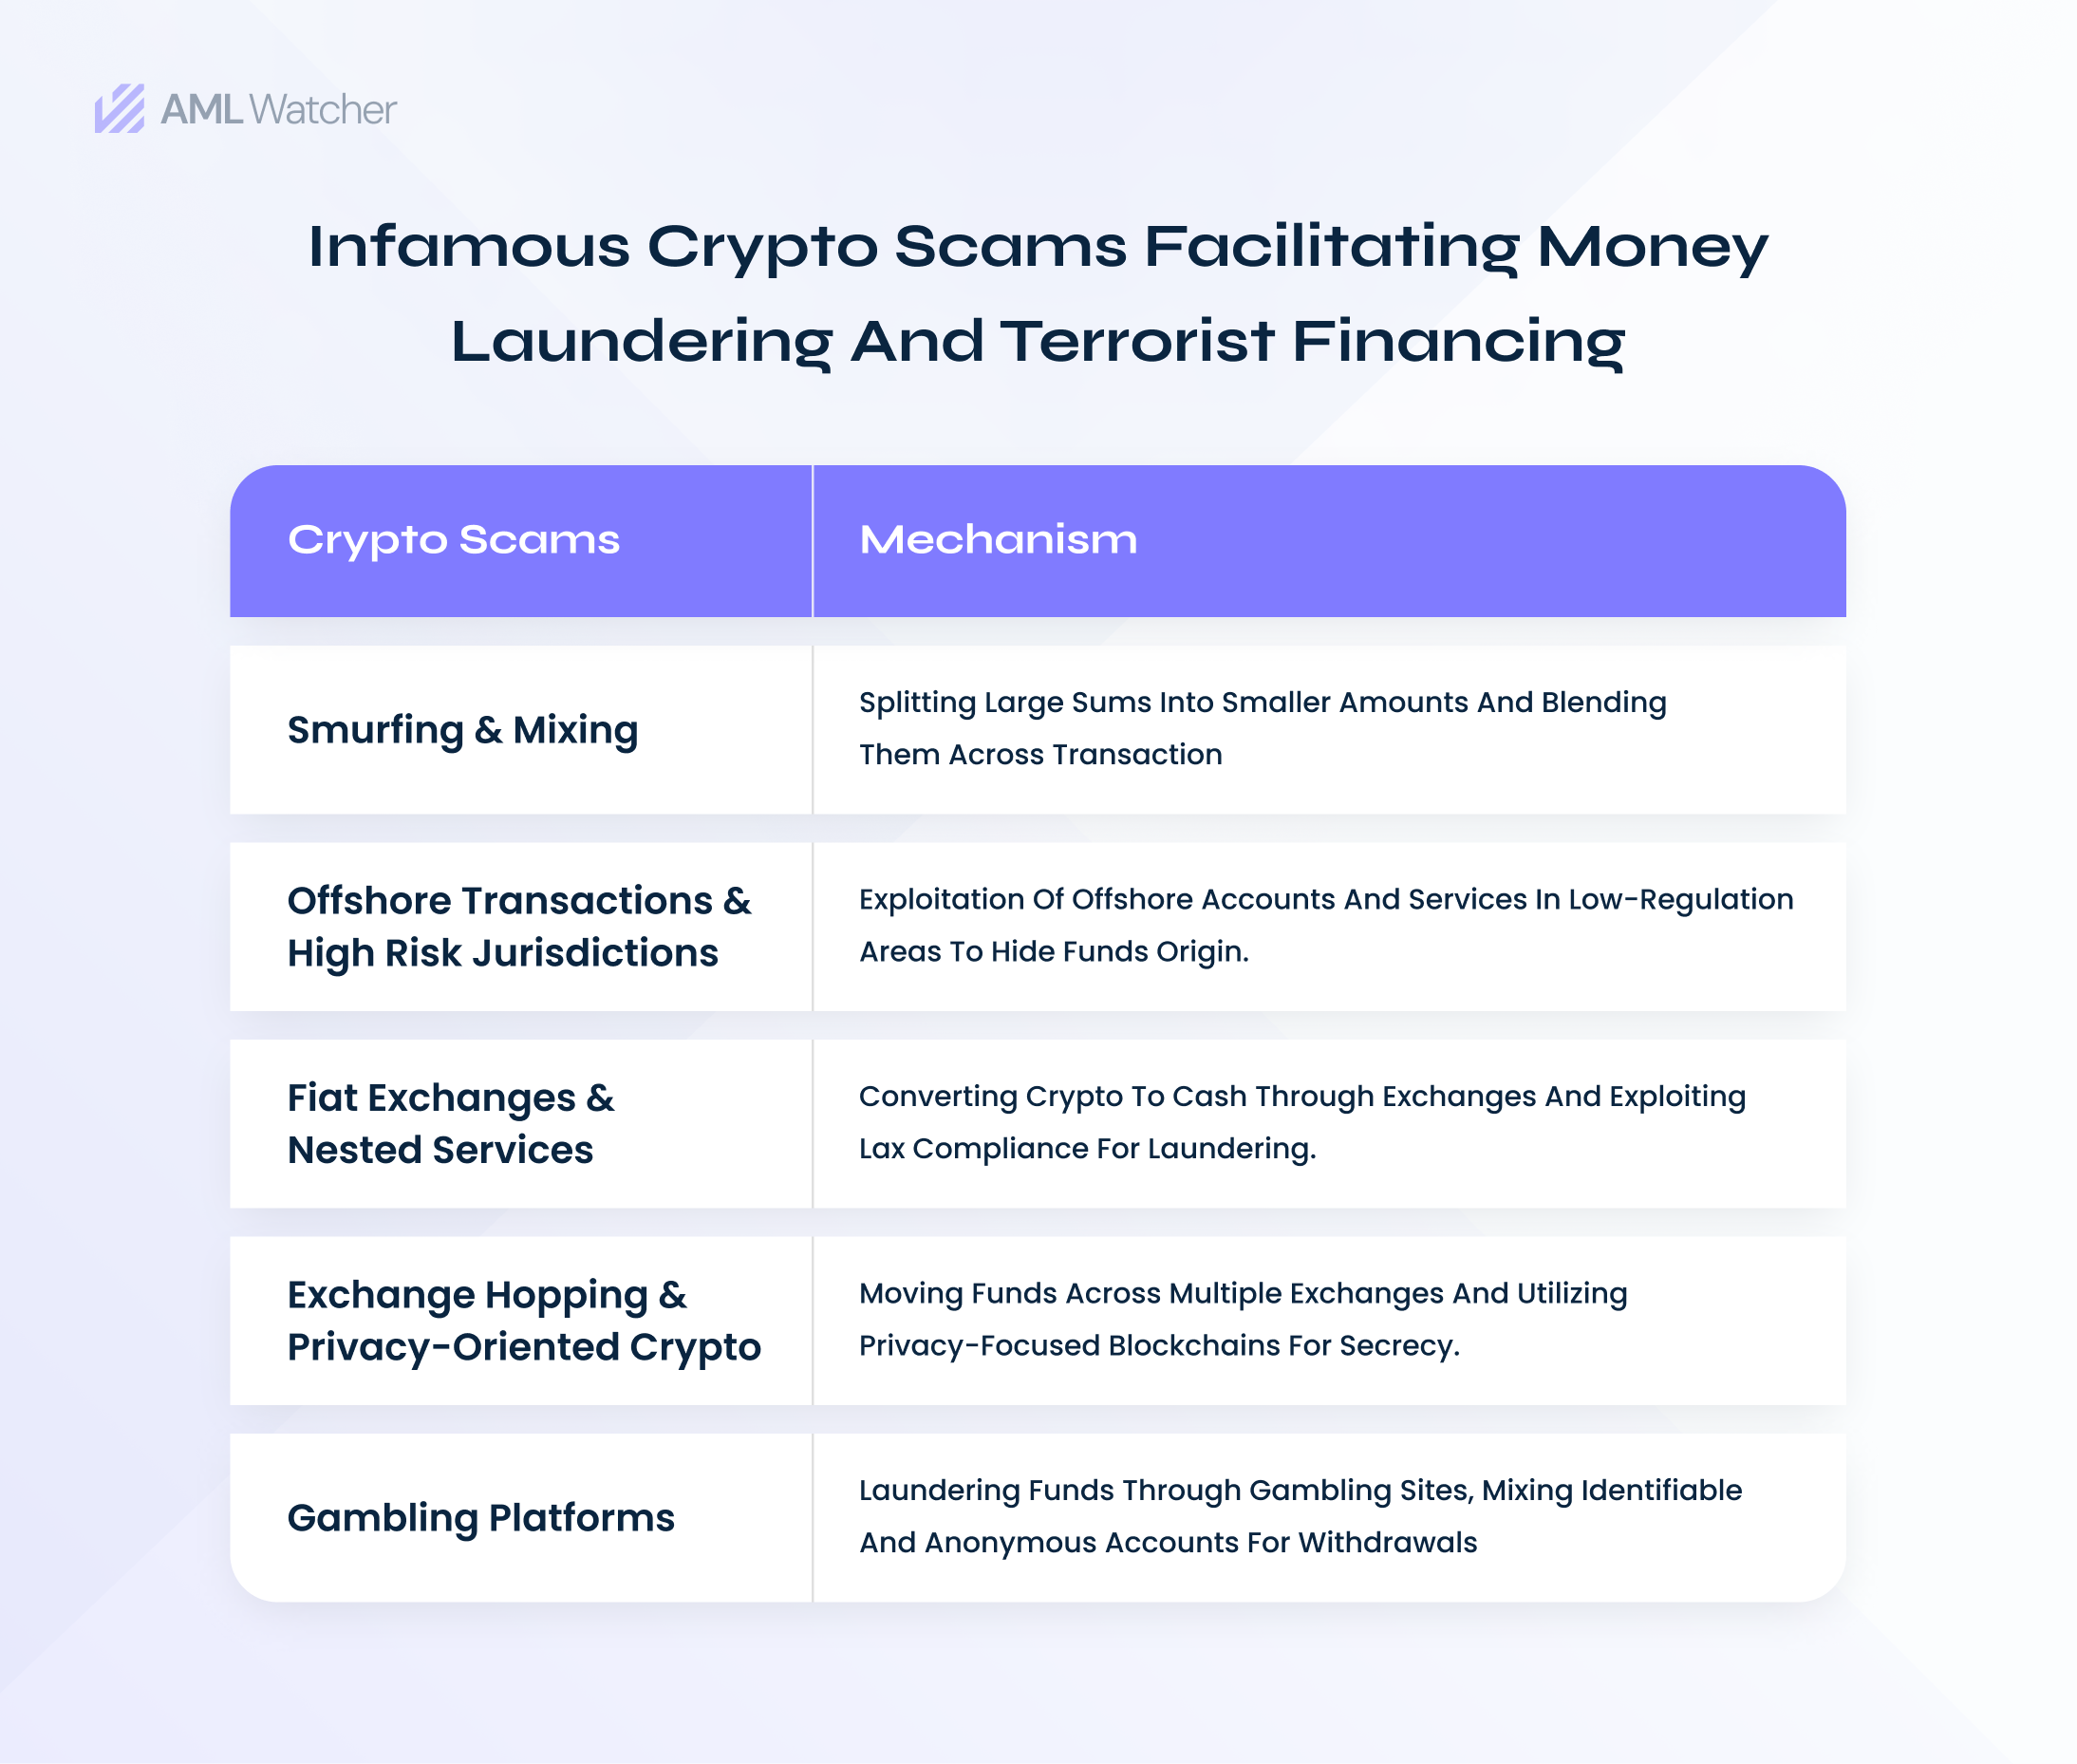 A concise list of crypto scams and their mechanism to facilitate money laundering. The scams include Smurfing & Mixing, Offshore Transactions & High Risk Jurisdictions, Fiat Exchanges & Nested Services, Exchange Hopping & Privacy-Oriented Crypto, and Gambling Platforms.